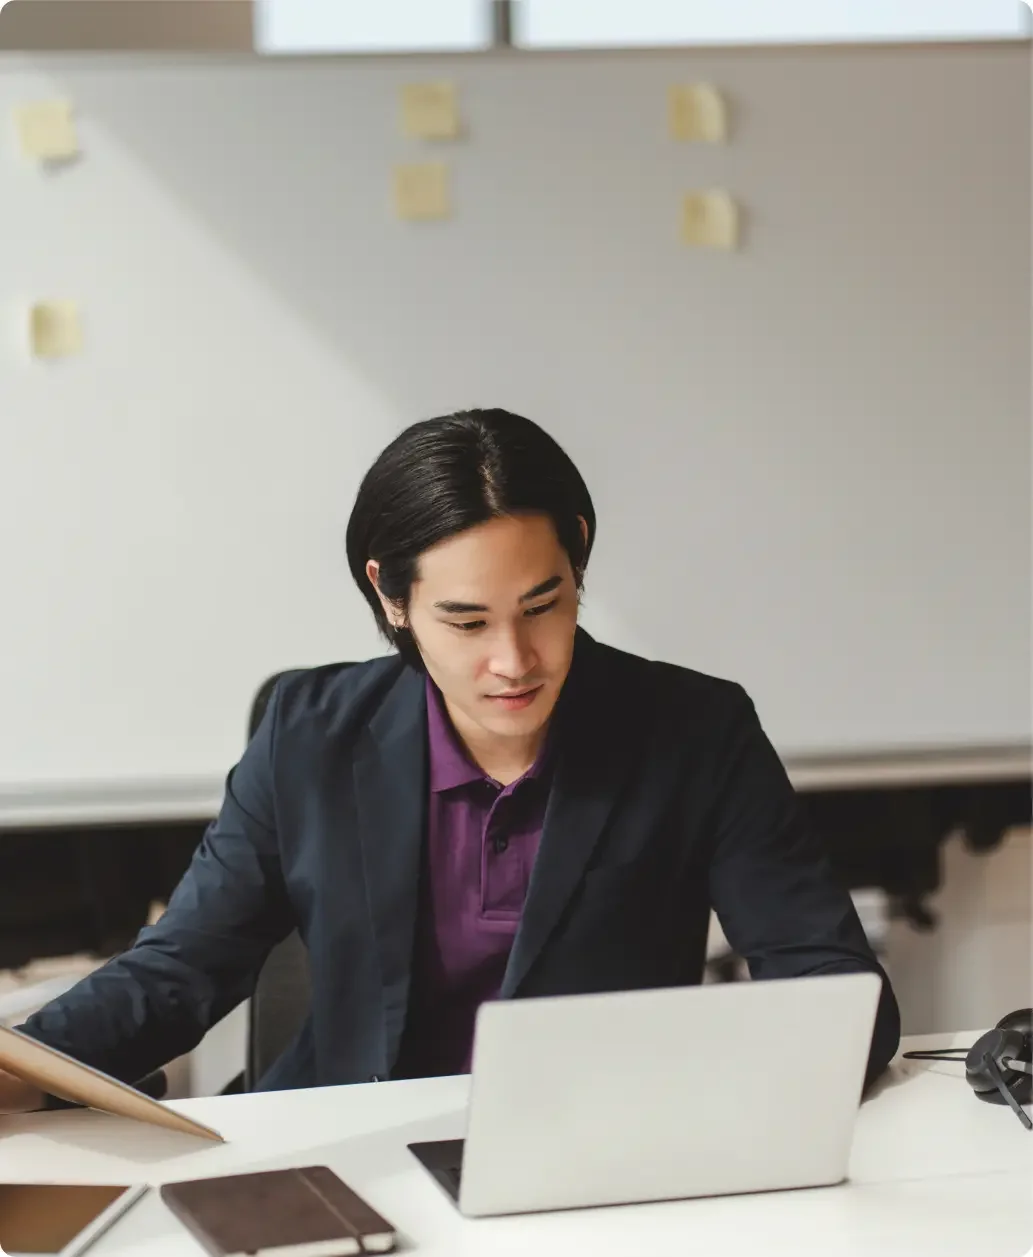 Asian man wearing a black suit jacket over a purple collared shirt working on his LegalZoom business dissolution on his laptop.